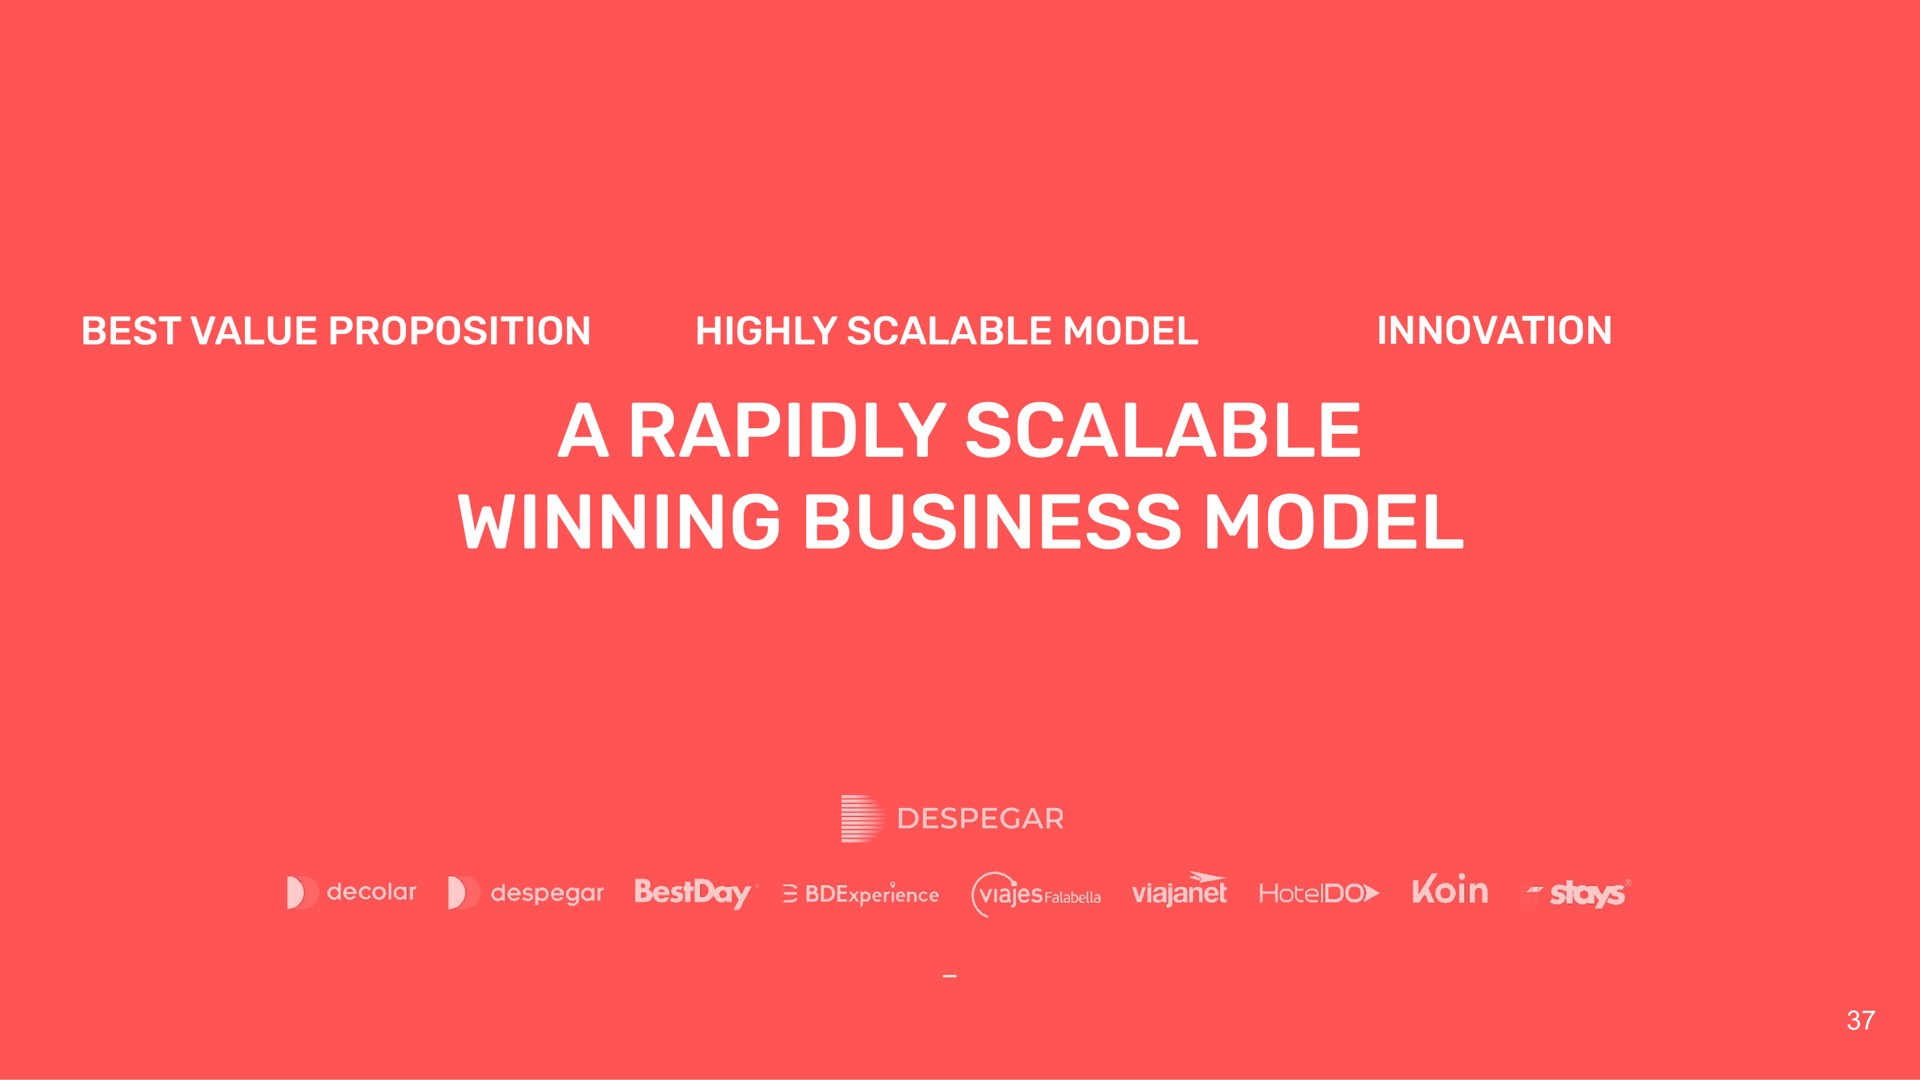 best value proposition highly scalable model innovation a rapidly scalable winning business model | Despegar